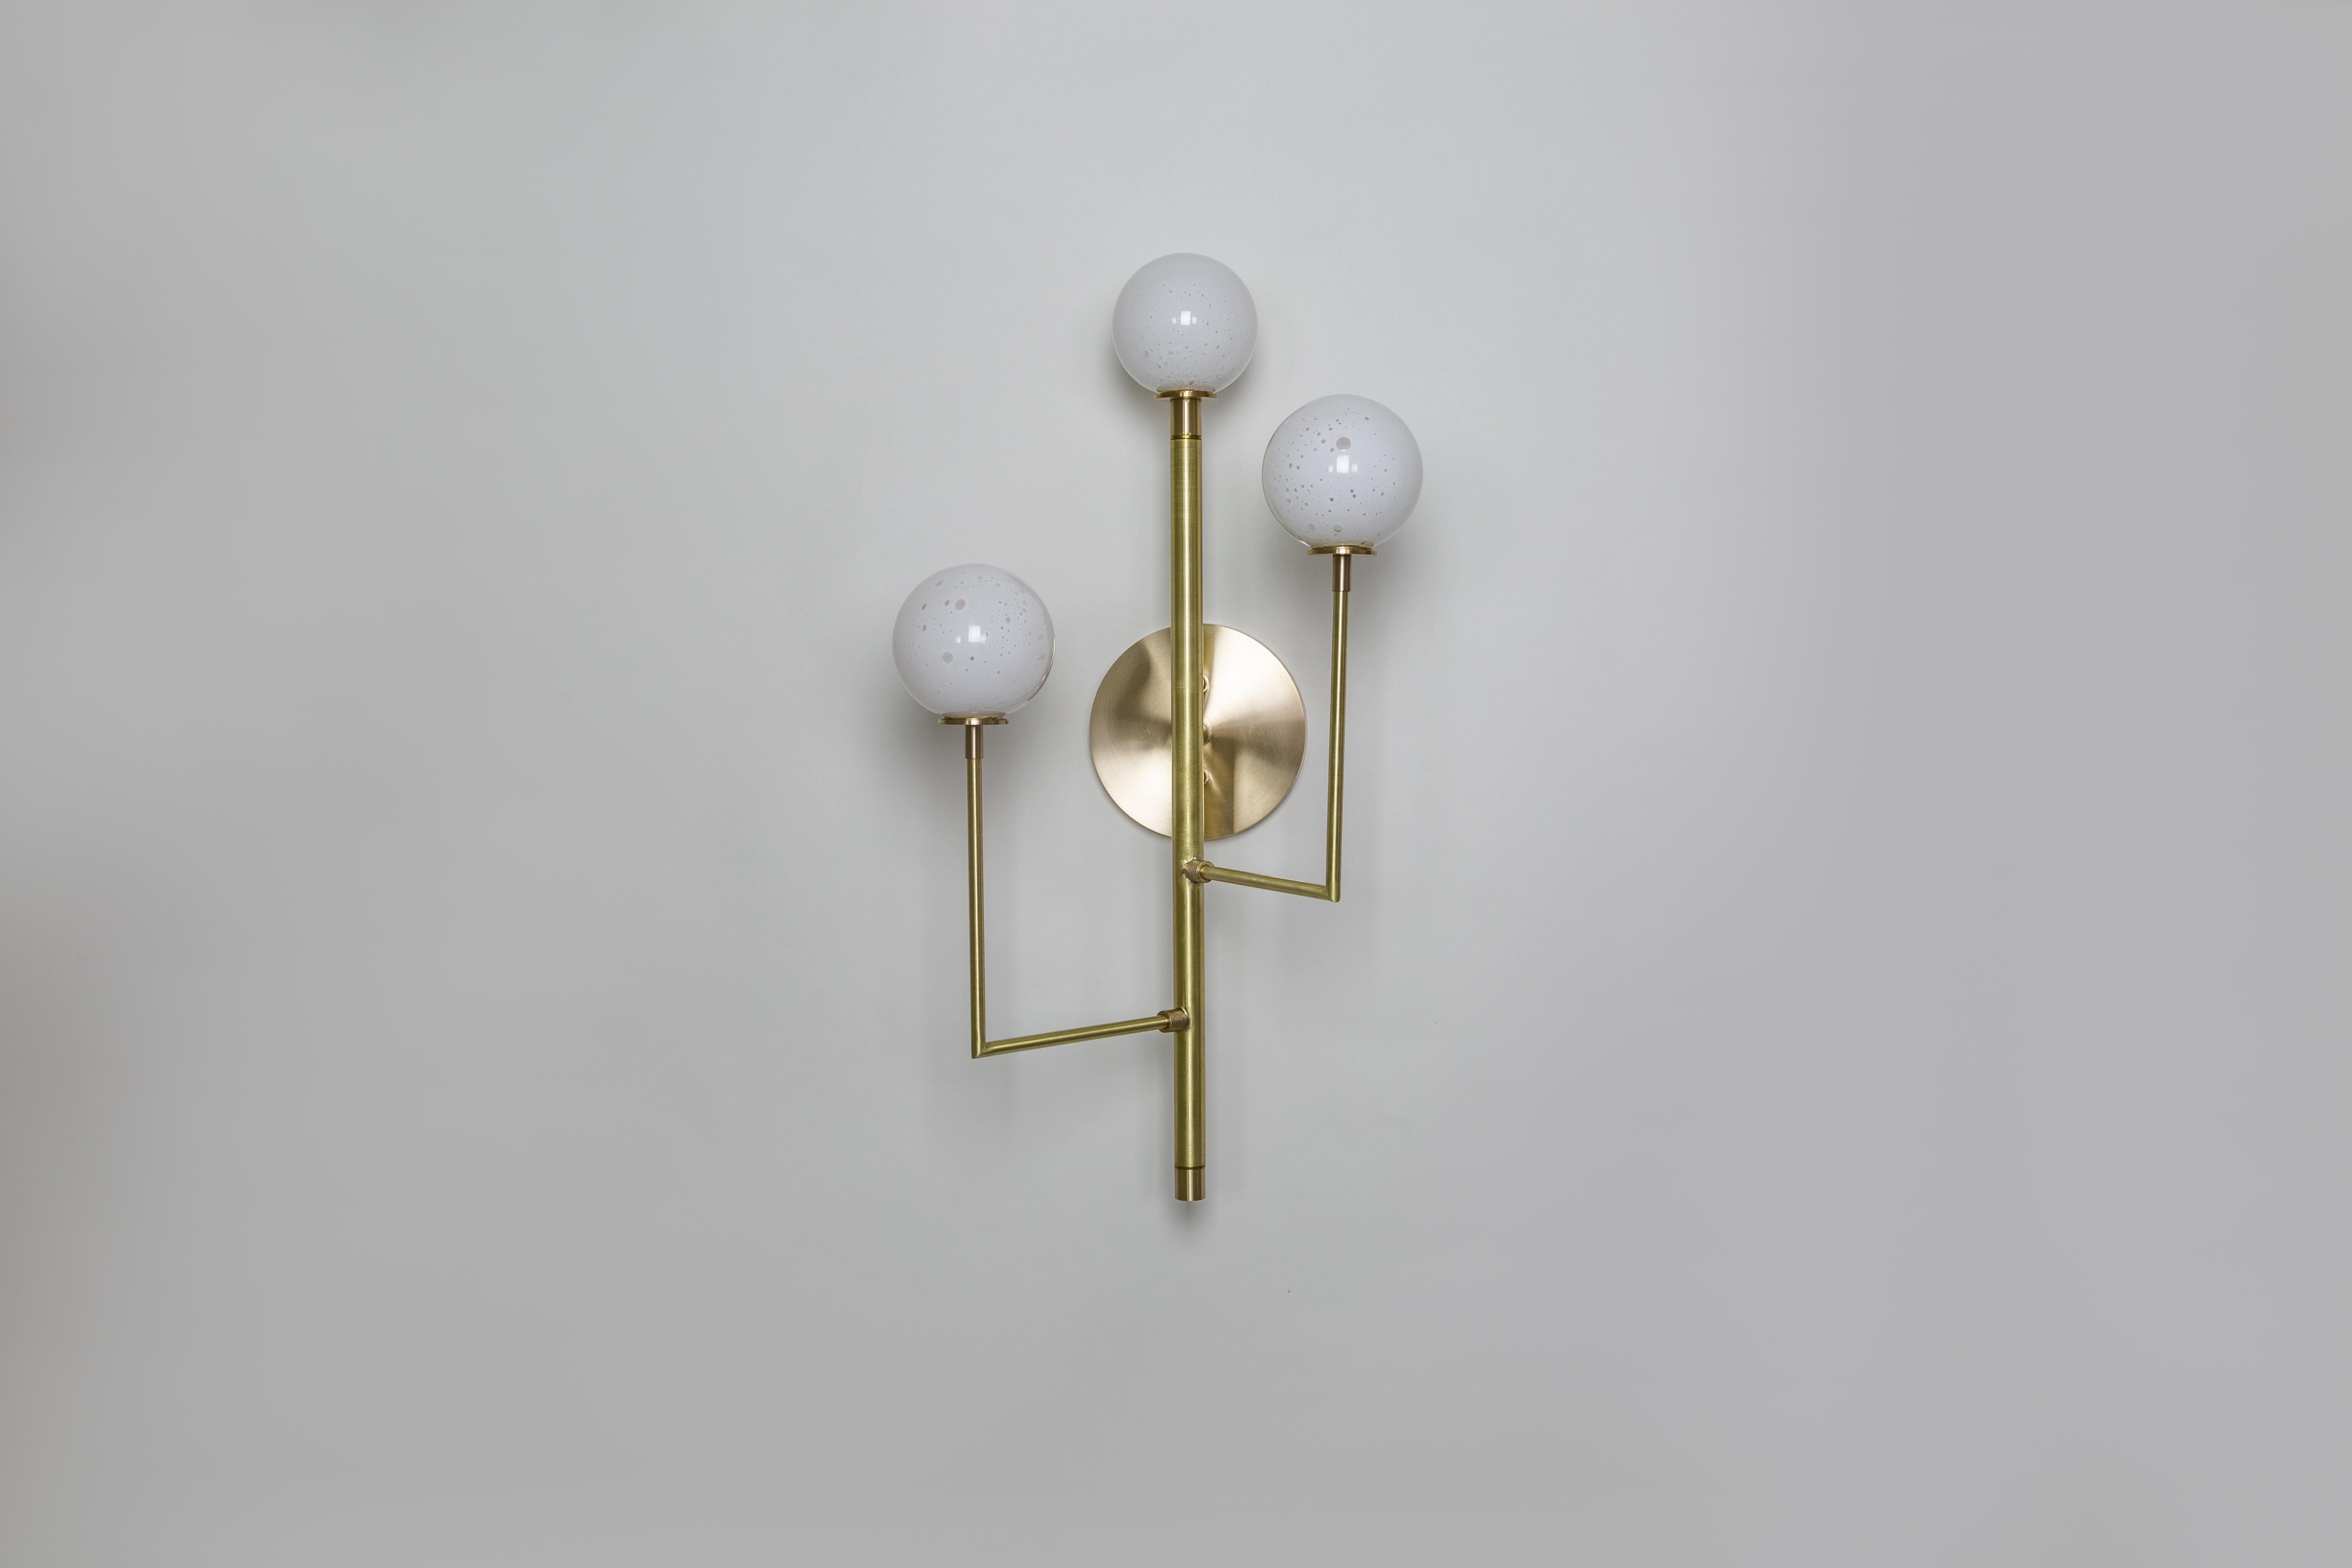 Kalin Asenov designs and fabricates lighting in Savannah, GA. Asenov works with a team of artisans and manufacturers to prototype, and build all pieces in his studio.

The design of Halo interprets ideas of celestial secret geometry; the form